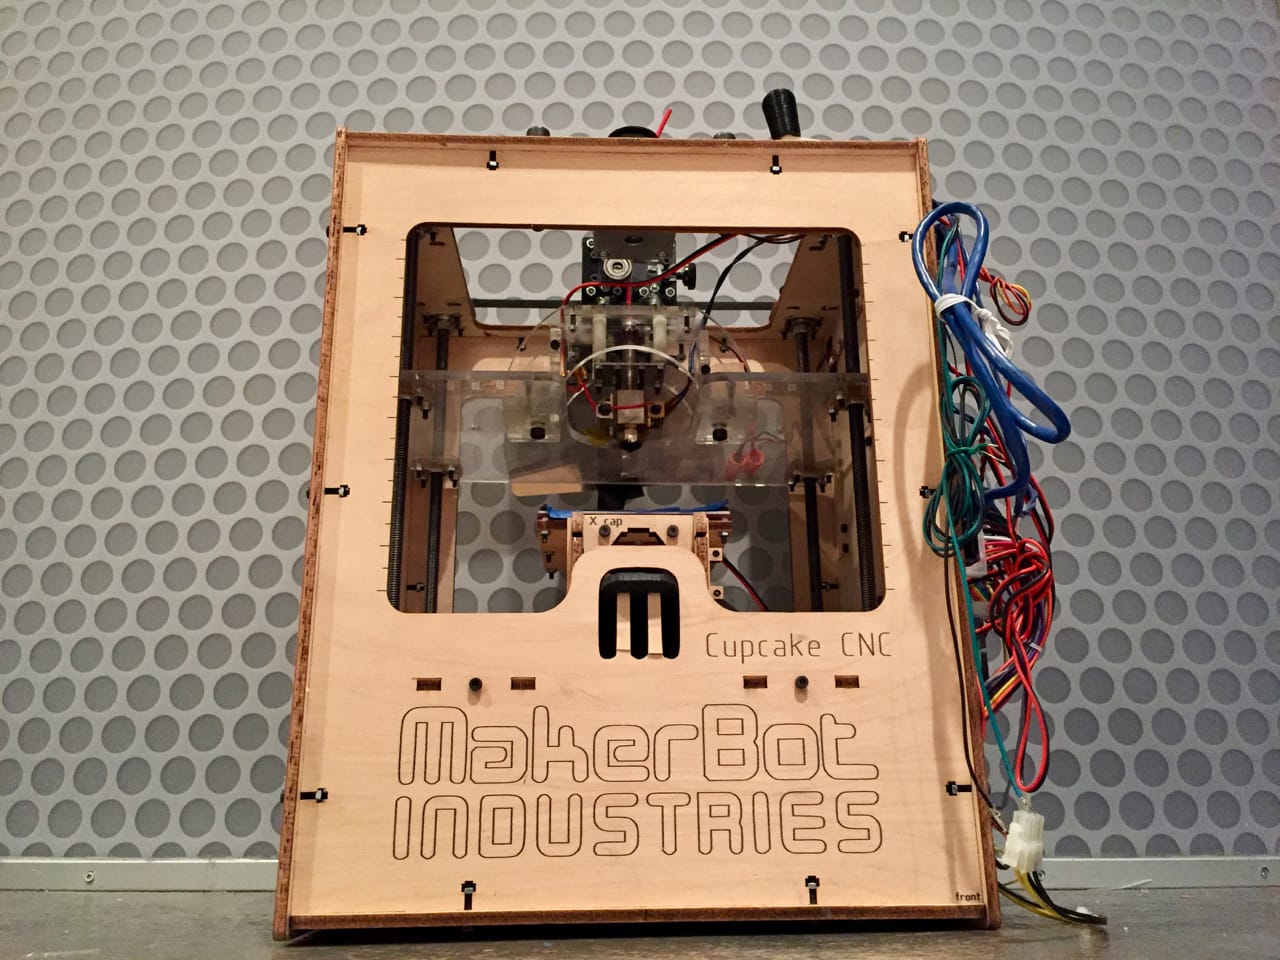 Finally, An Intelligent Spool Holder: The MonsterFeed « Fabbaloo